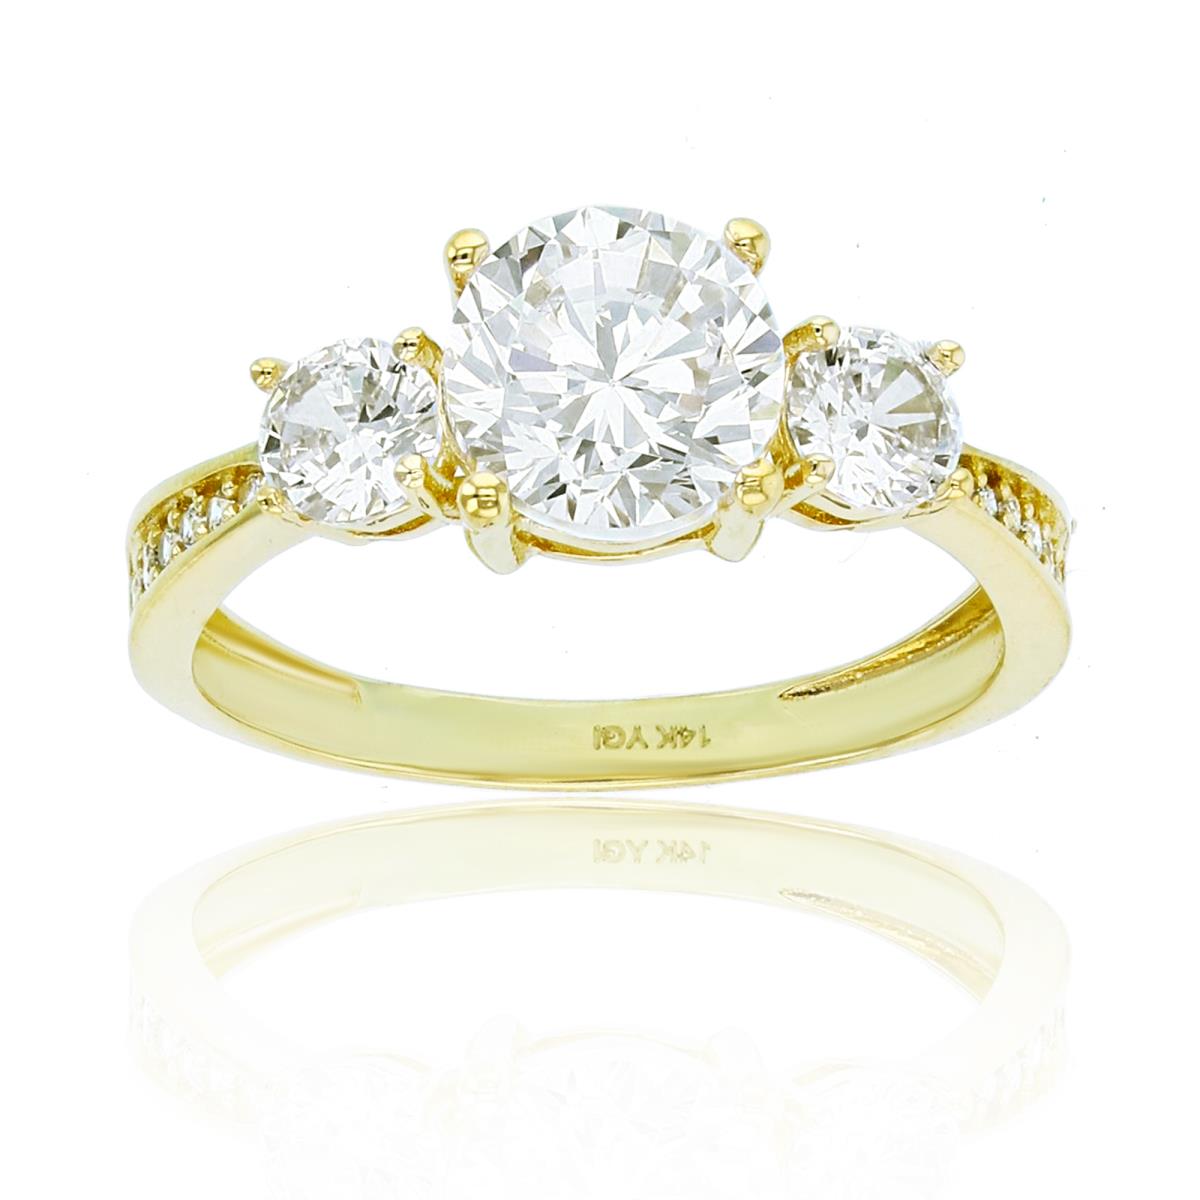 10K Yellow Gold 7mm/4mm Rnd CZ 3-Stones Center Engagement Ring